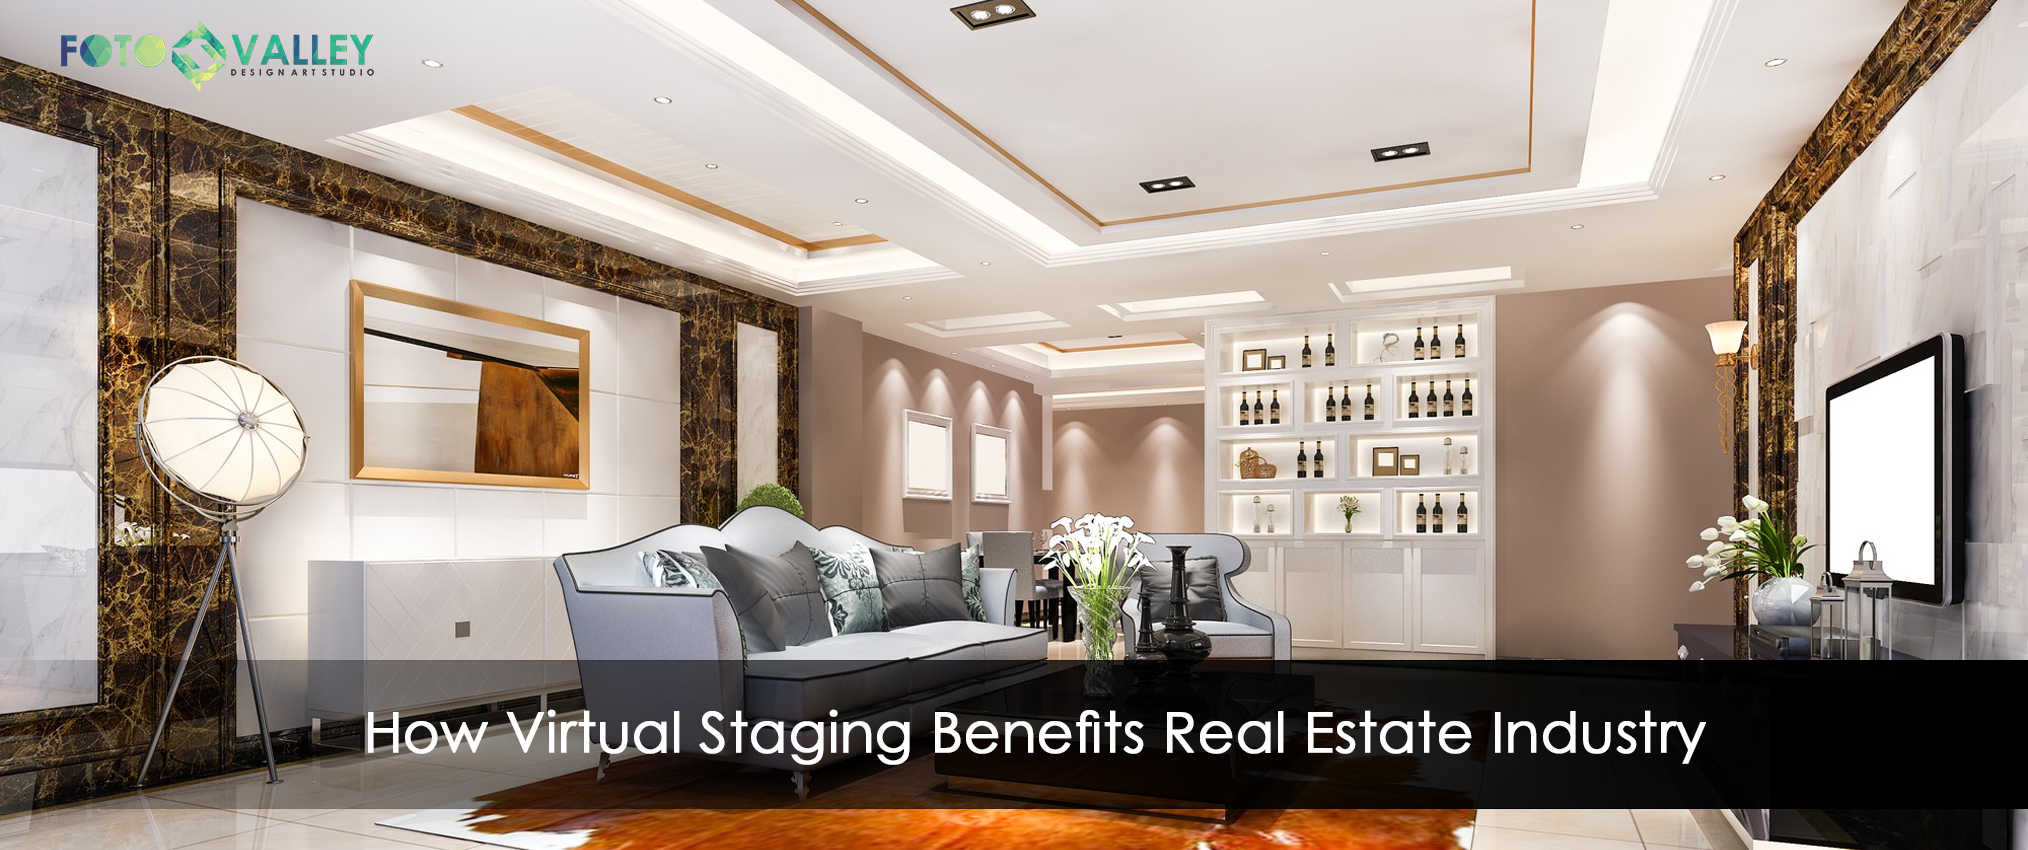 is Real Estate Virtual Staging